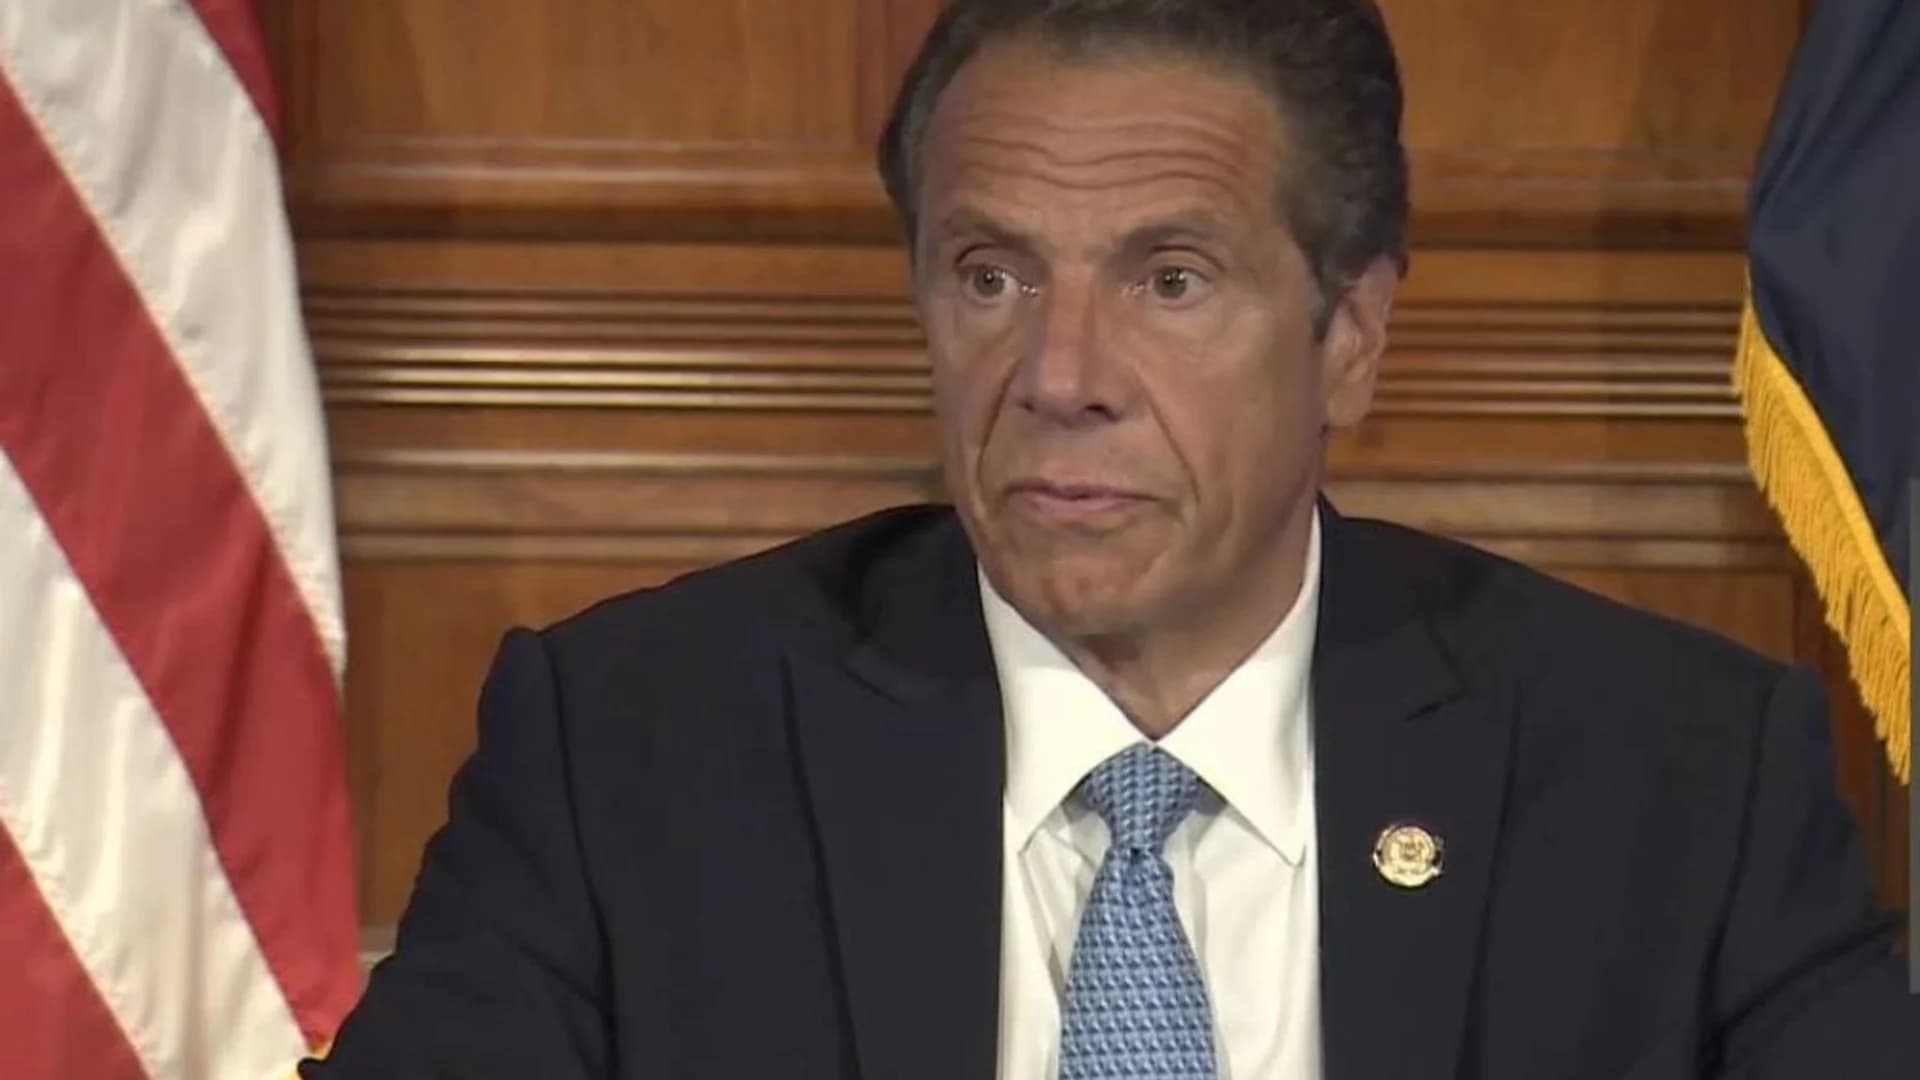 Gov. Cuomo: NY casinos, NYC malls can reopen on Sept. 9